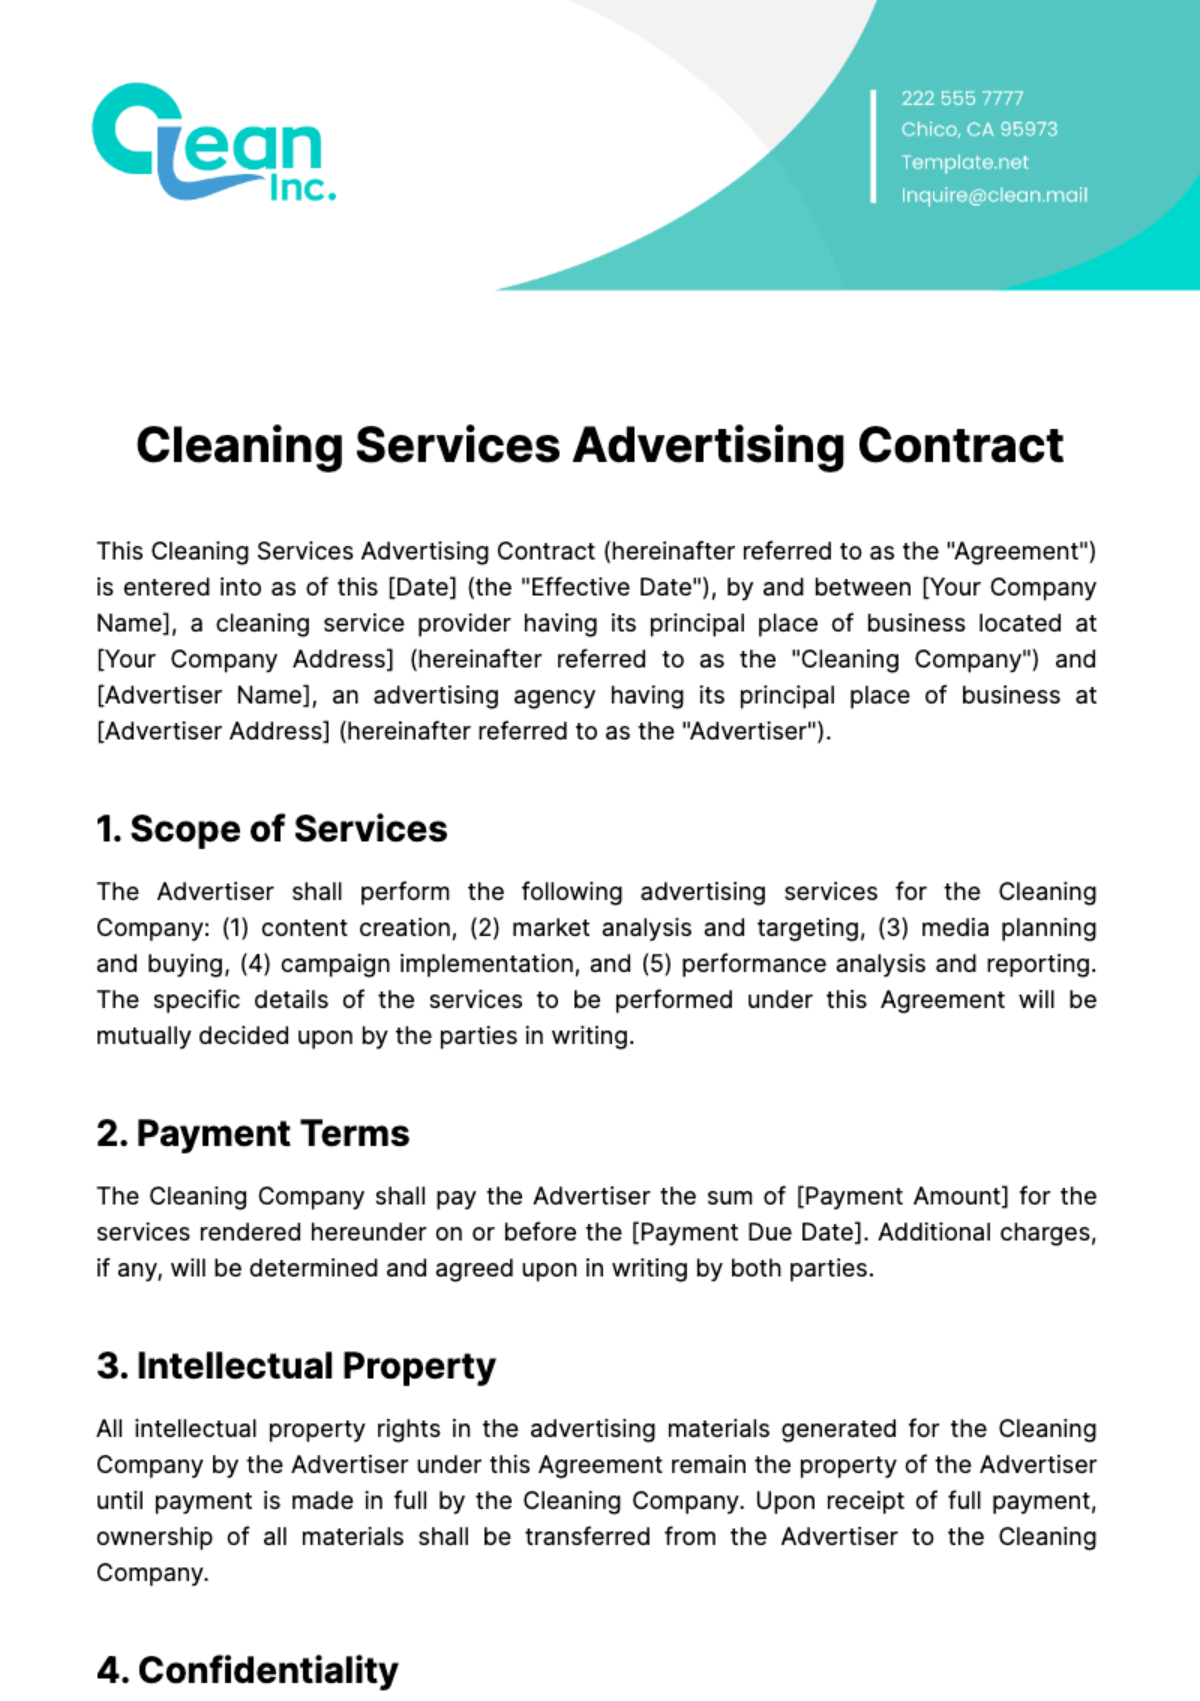 Cleaning Services Advertising Contract Template